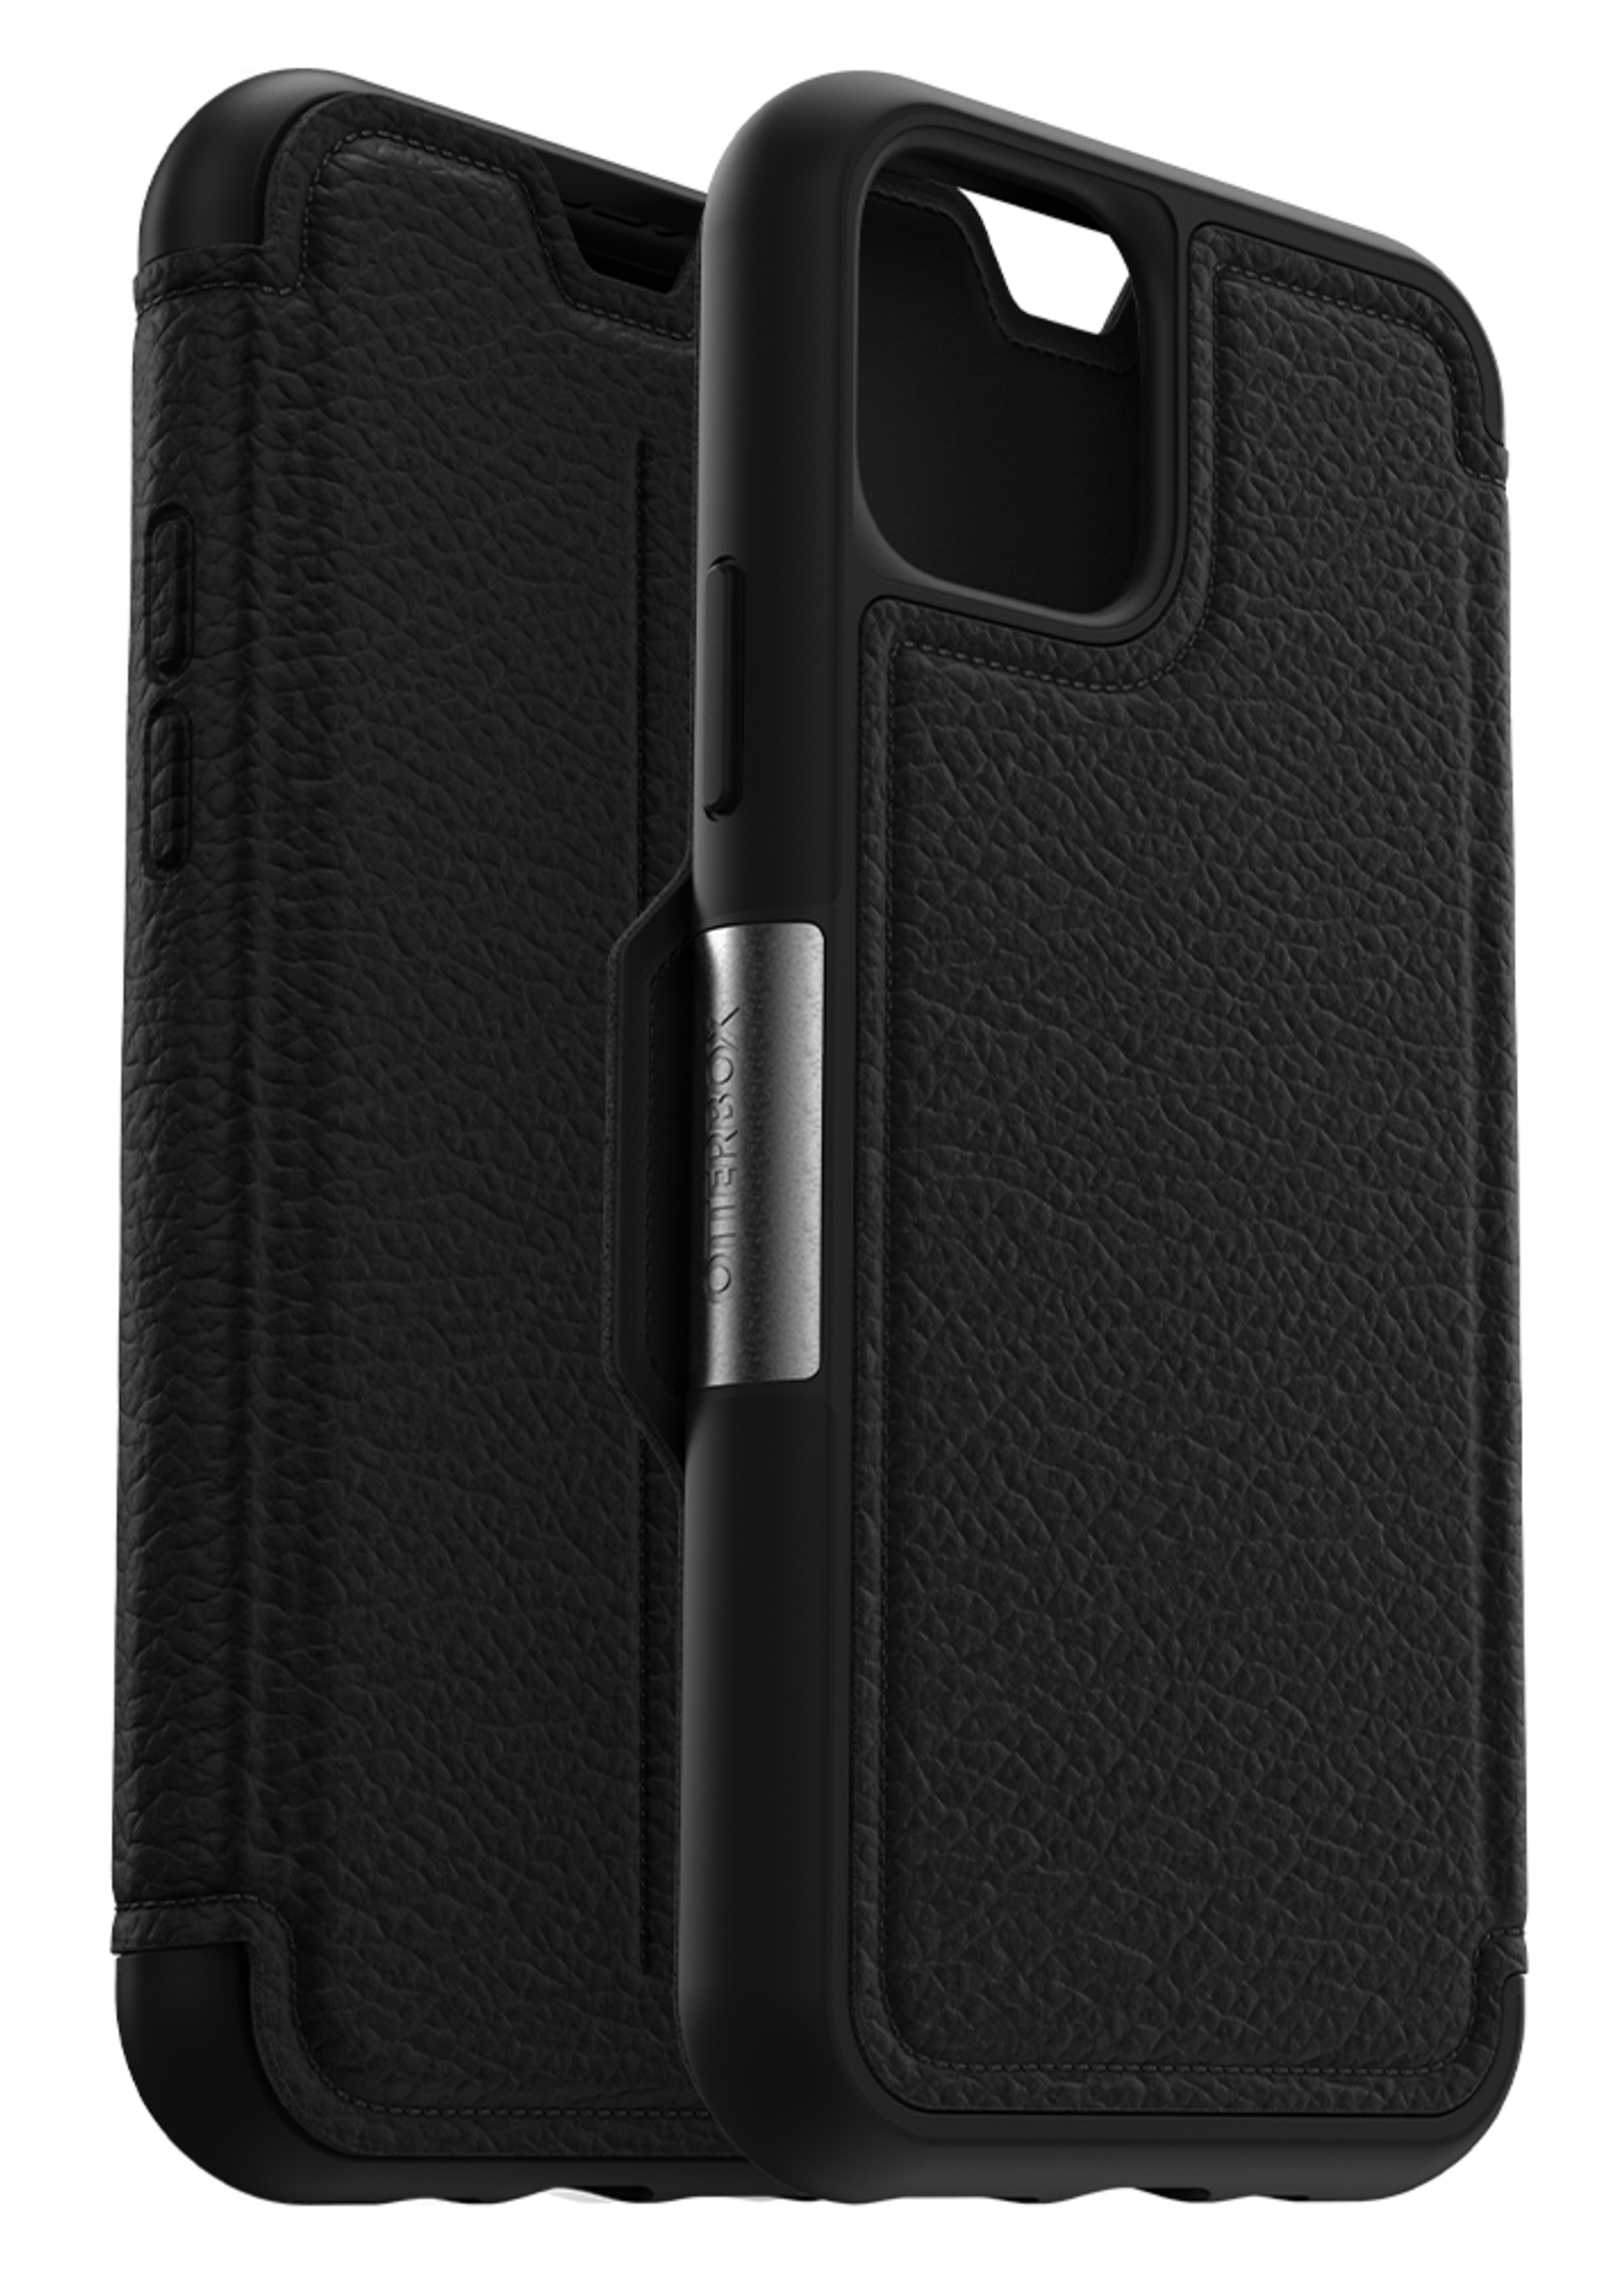 Otterbox OtterBox - Strada Case for Apple iPhone 11 Pro - Shadow